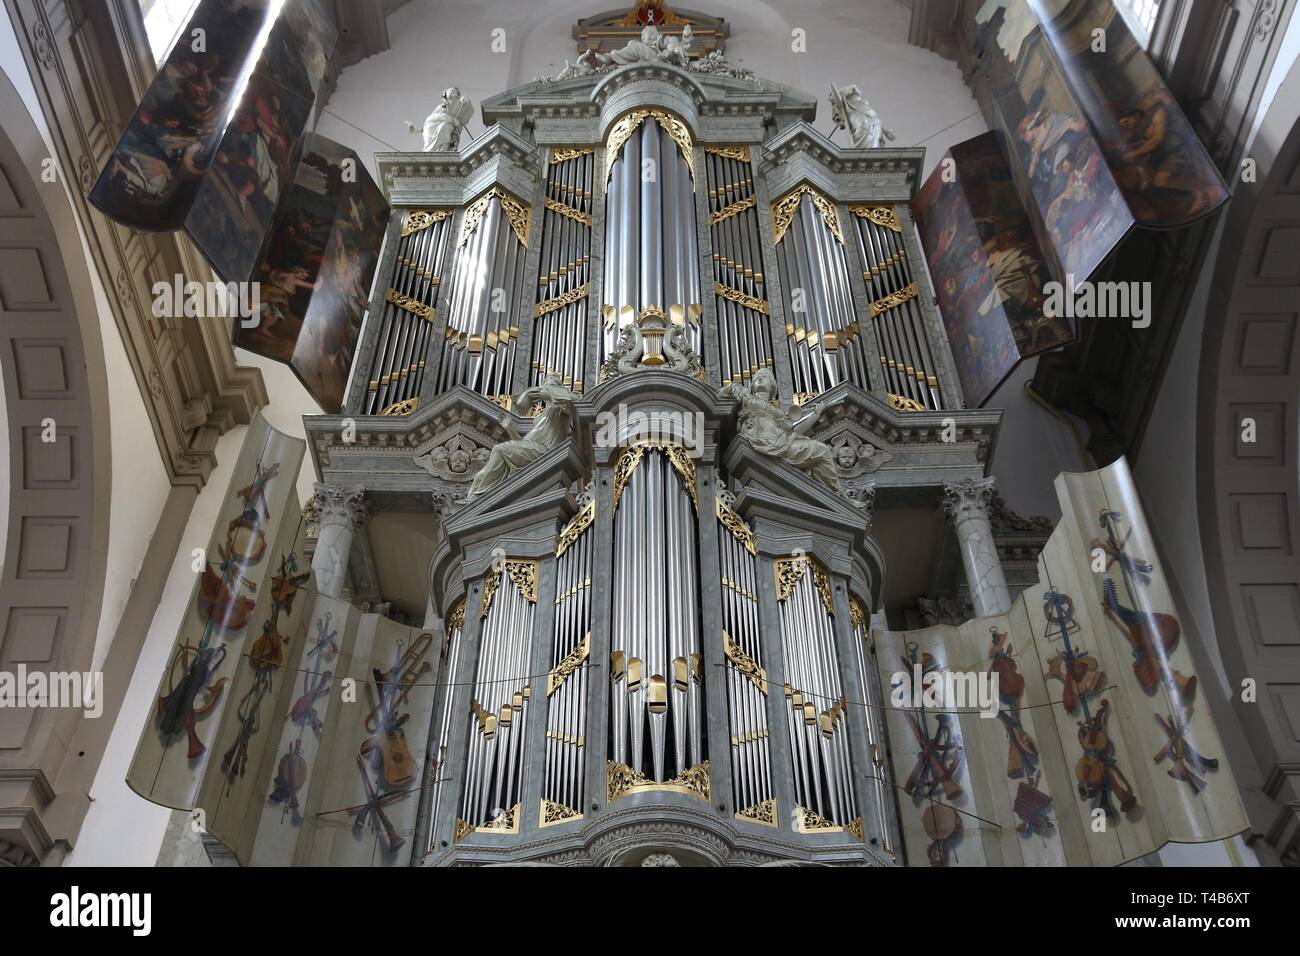 AMSTERDAM, NETHERLANDS - JULY 7, 2017: Church organ at Westerkerk church in Amsterdam, Netherlands. Westerkerk was completed in 1631. It is located in Stock Photo